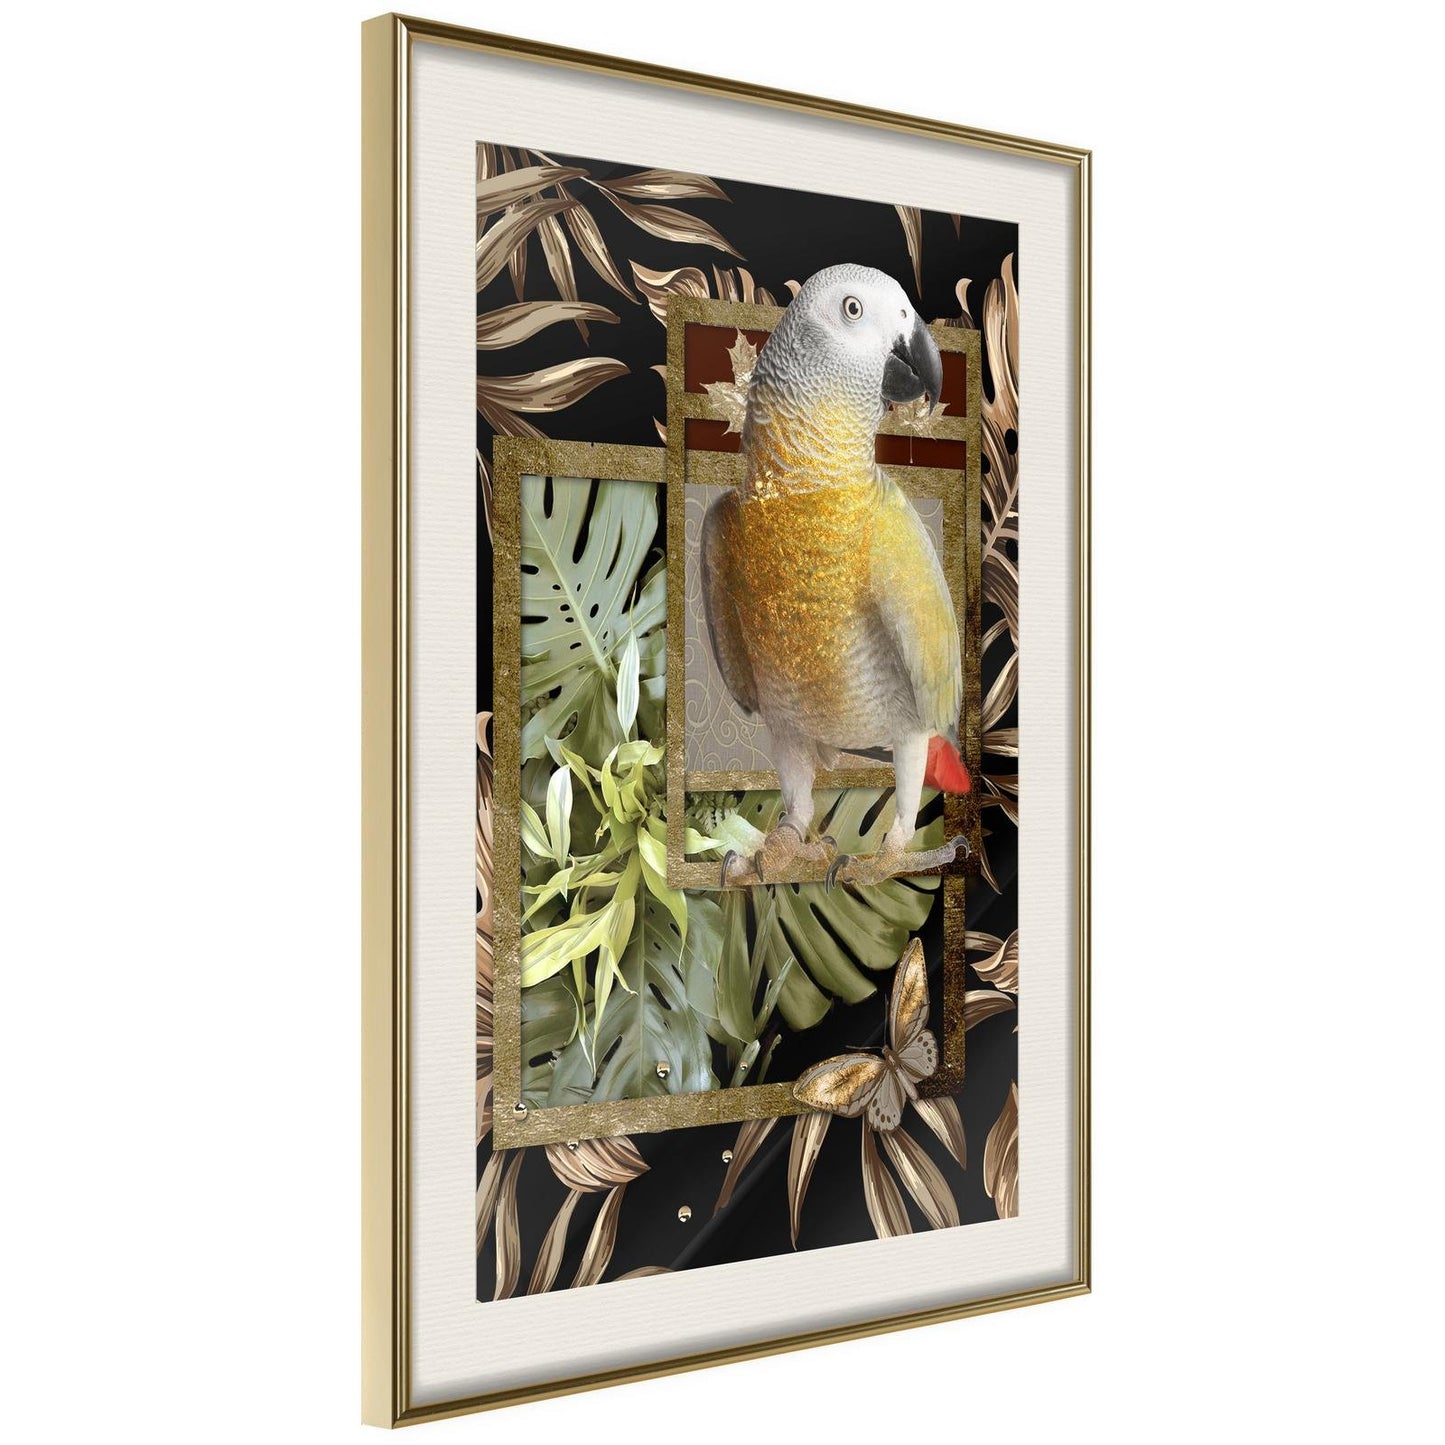 Composition with Gold Parrot